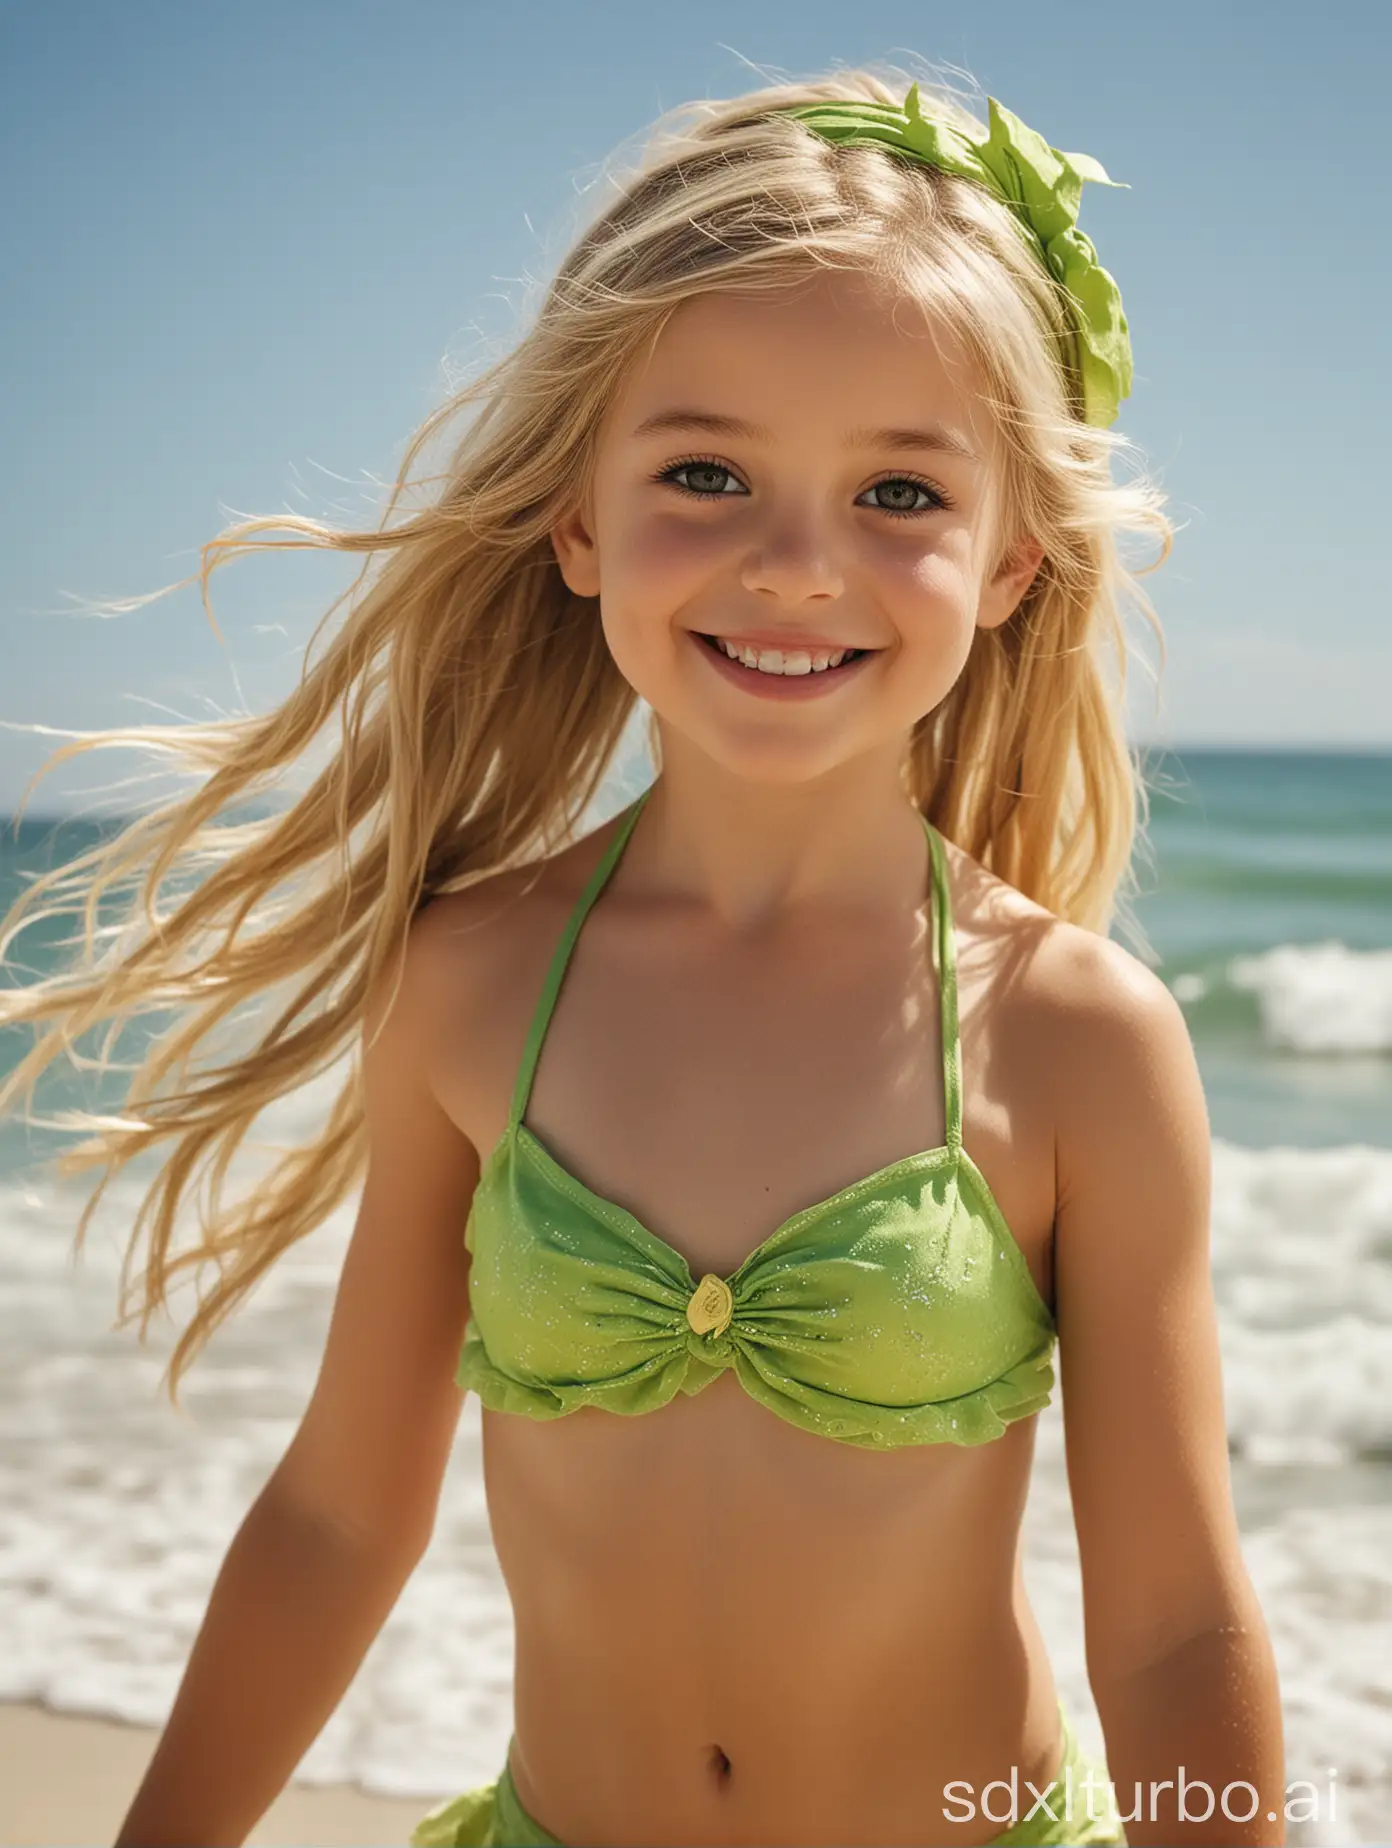 Subject: The main subject of the image is a 9-year-old blonde girl.nCostume/Appearance: The girl has long hair and wears a Tinker Bell bikini, typical attire for a beach day. She has on makeup. Her smile and confidence could be highlighted in her facial expression and posture.nAction: The girl is smiling, indicating joy and contentment. She might be posing confidently to showcase her muscular abs, suggesting pride or confidence.nItems: The girl is wearing a tiny lime green bikini swimsuit, emphasizing her physique.nAccessories: Accessories might include sunglasses, sunscreen, or a beach towel nearby, adding realism to the beach setting.nBackground: The background could feature a sunny beach with waves gently crashing onto the shore, enhancing the summery vibe.